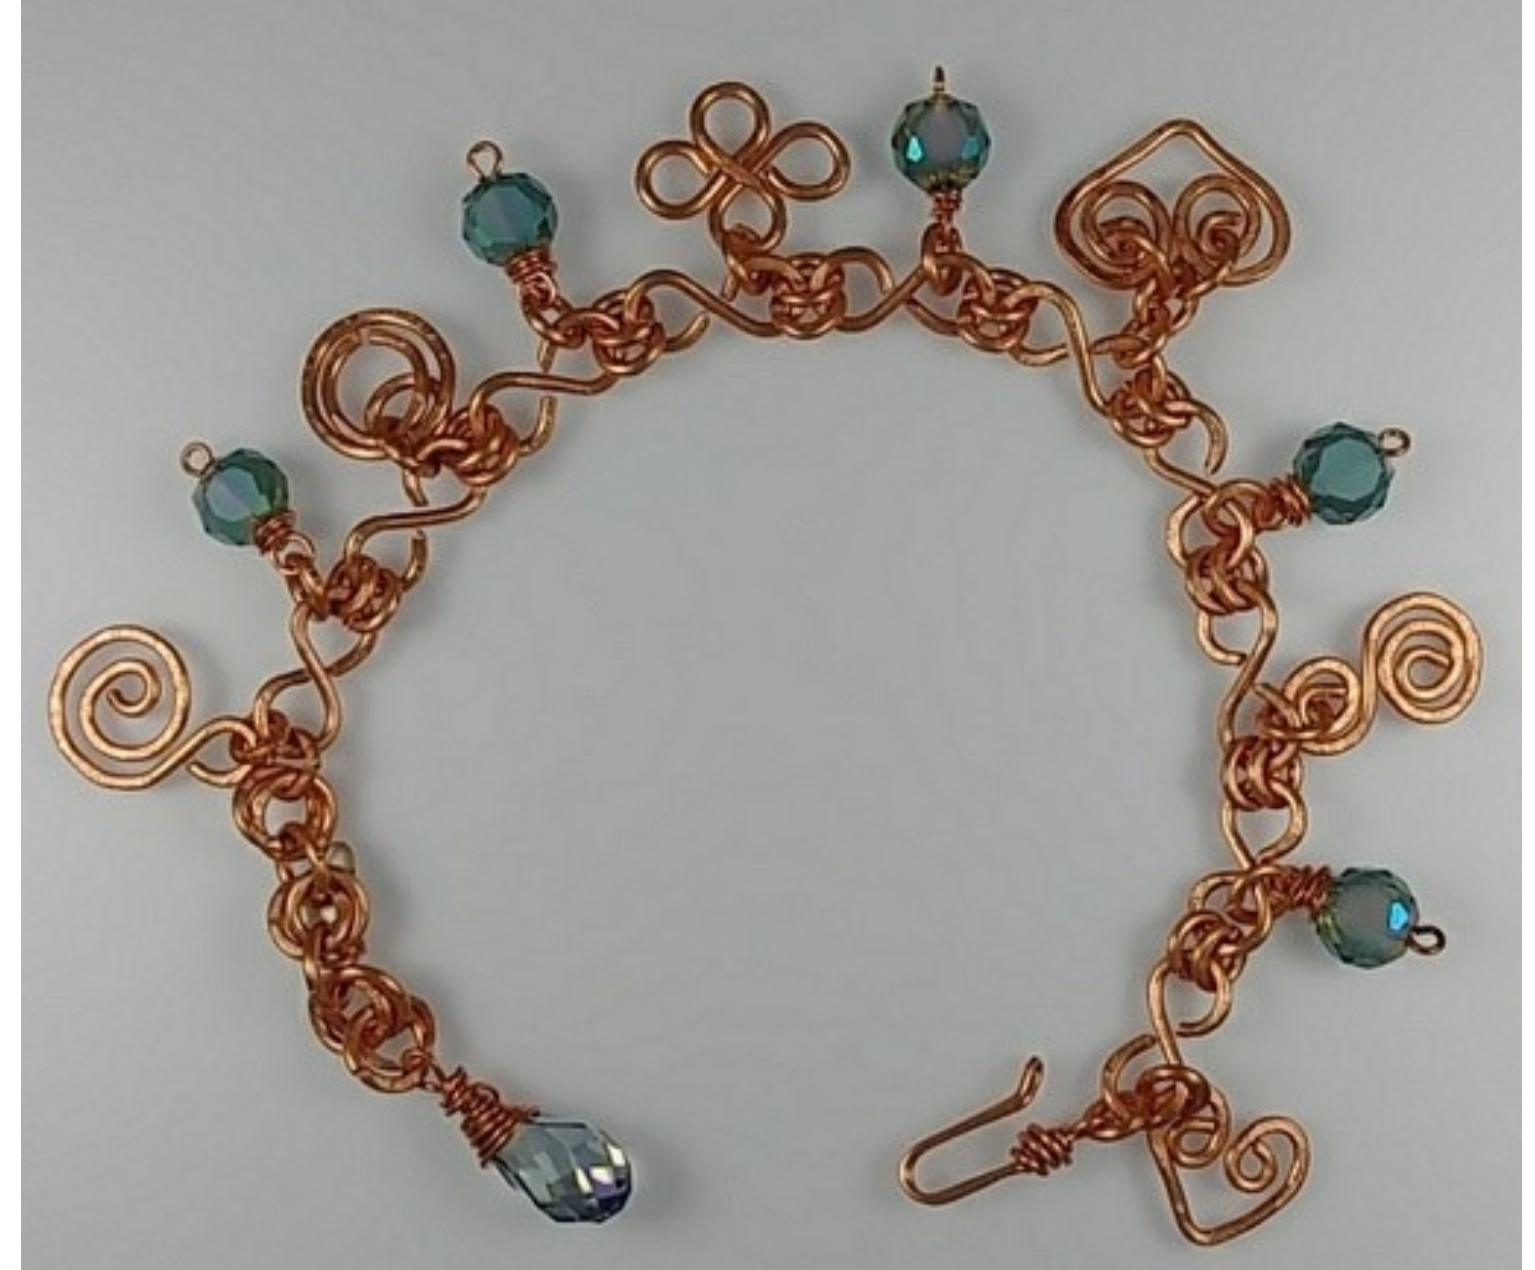 (220  - BCT) - Description: Handcrafted Bracelet, Copper Wire, Faceted Glass Beads,  Hook Closure - Dimension: Adjustable up to 7 1/2 ' L (Inches)